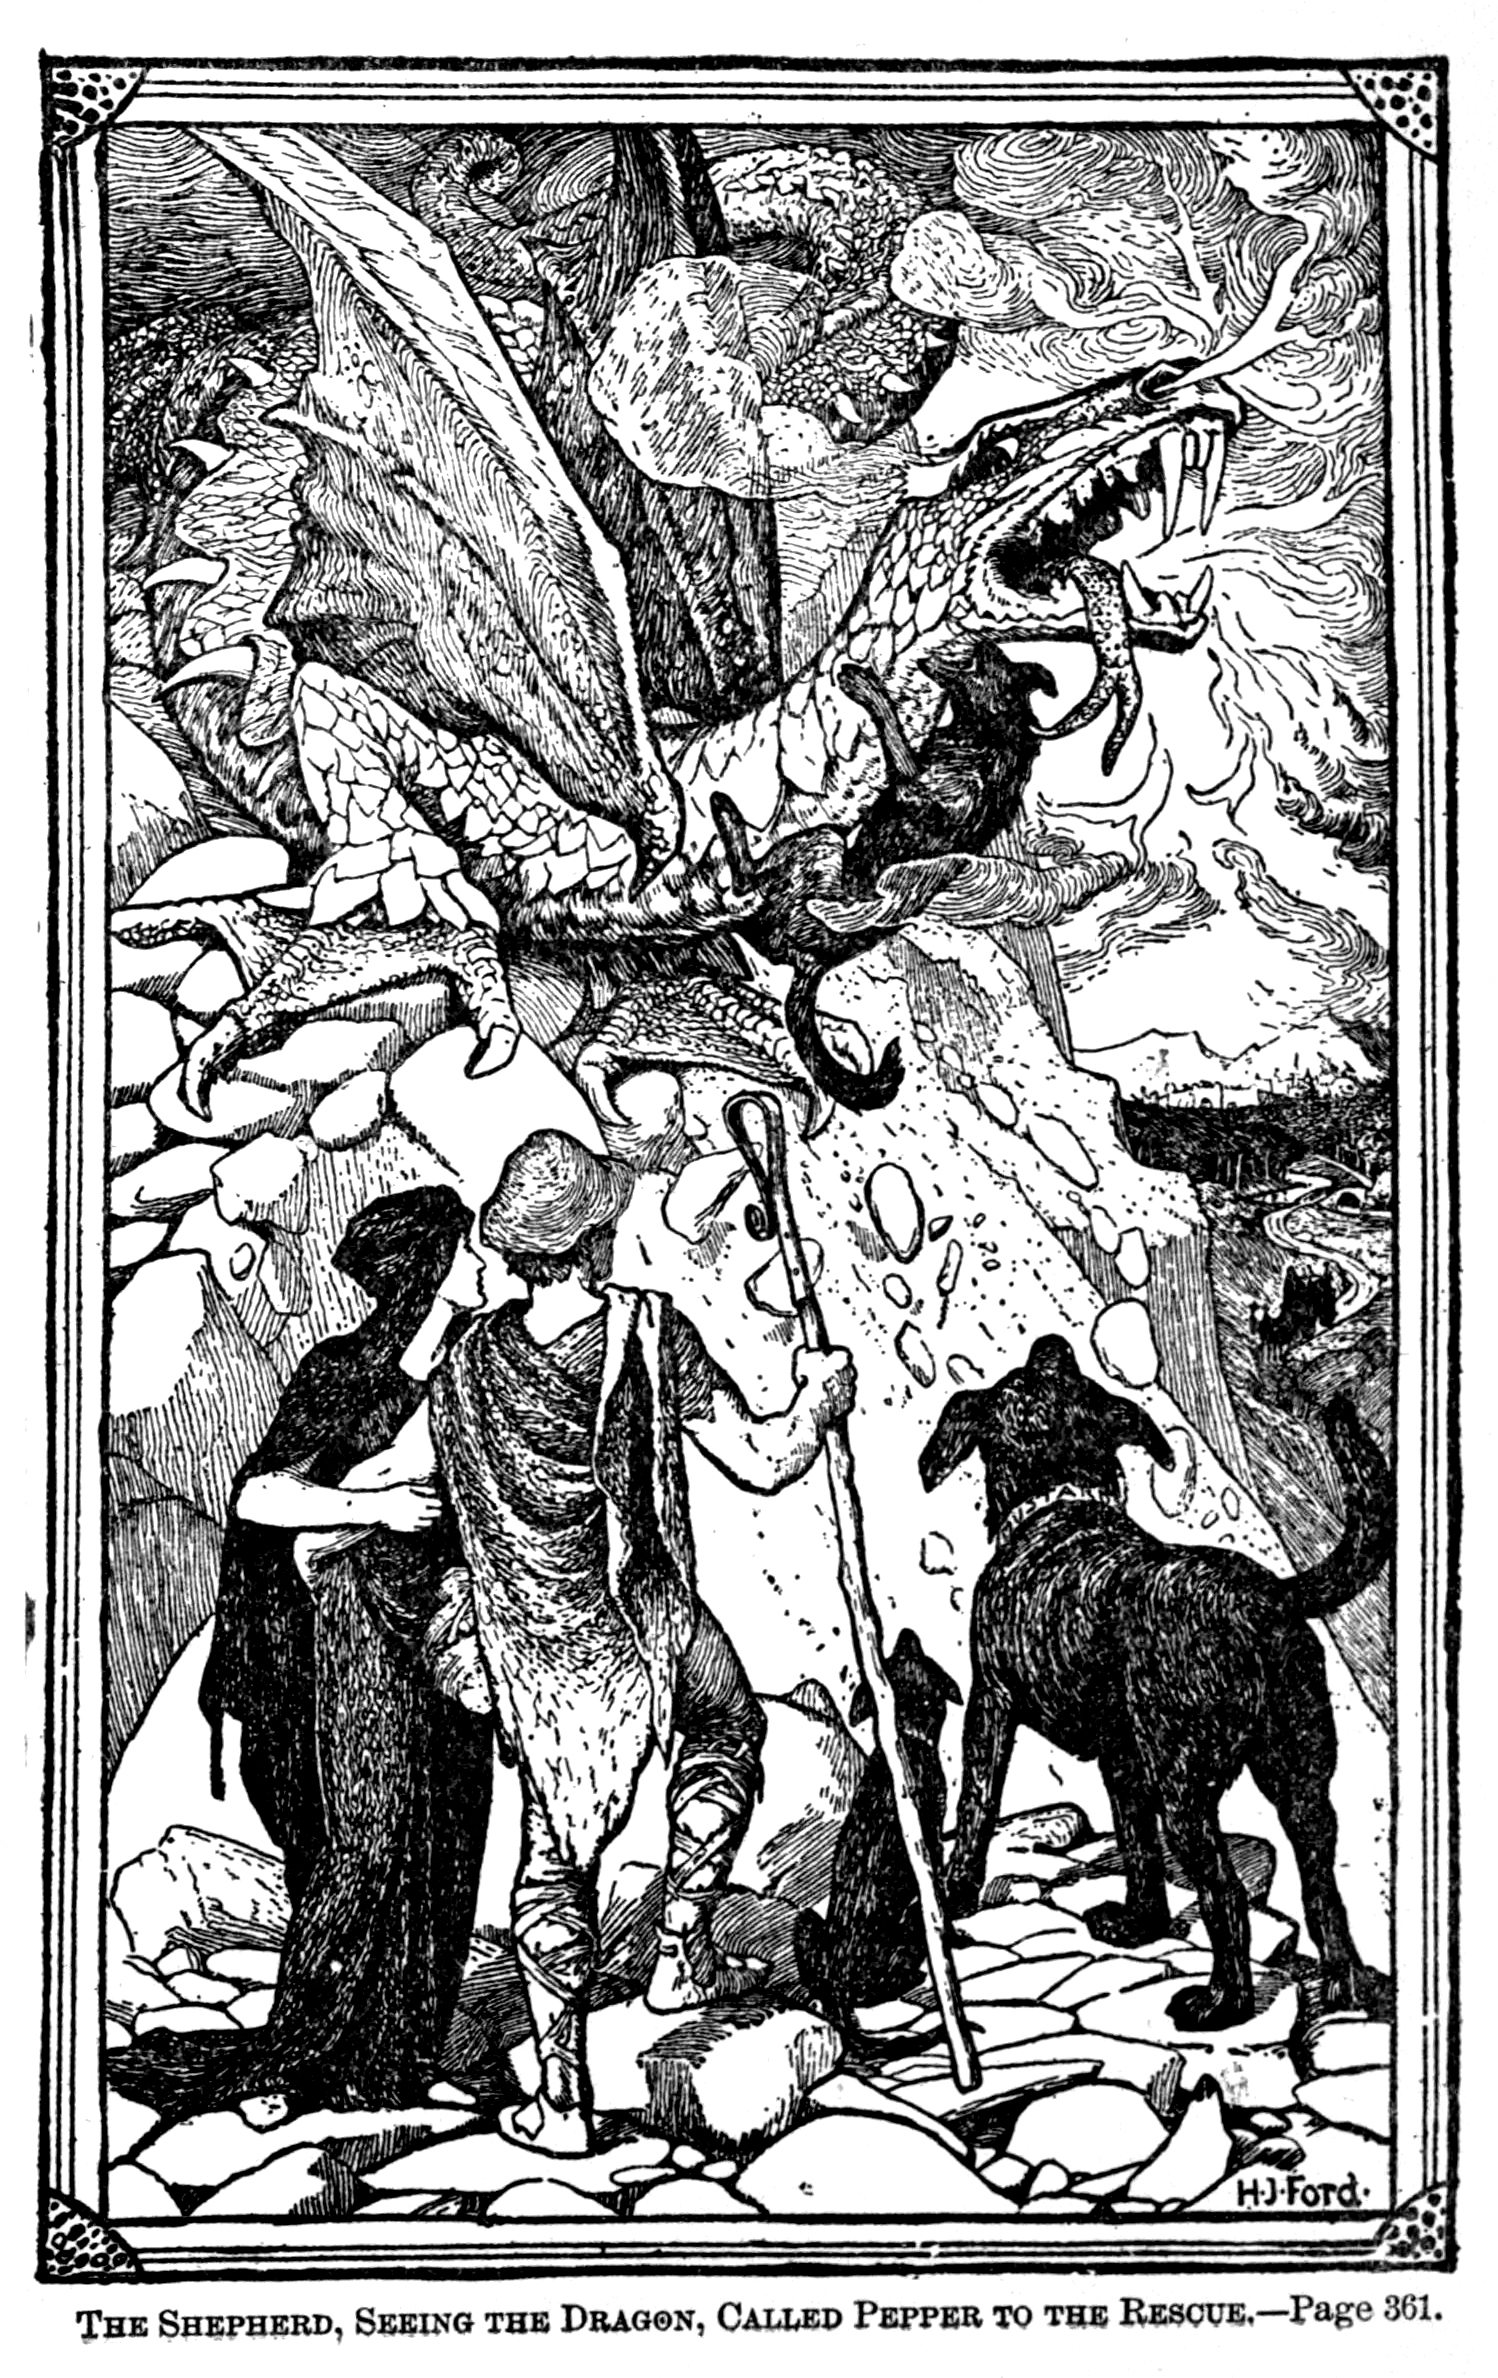 Henry Justice Ford - The green fairy book, edited by Andrew Lang, 1900 (illustration 9)